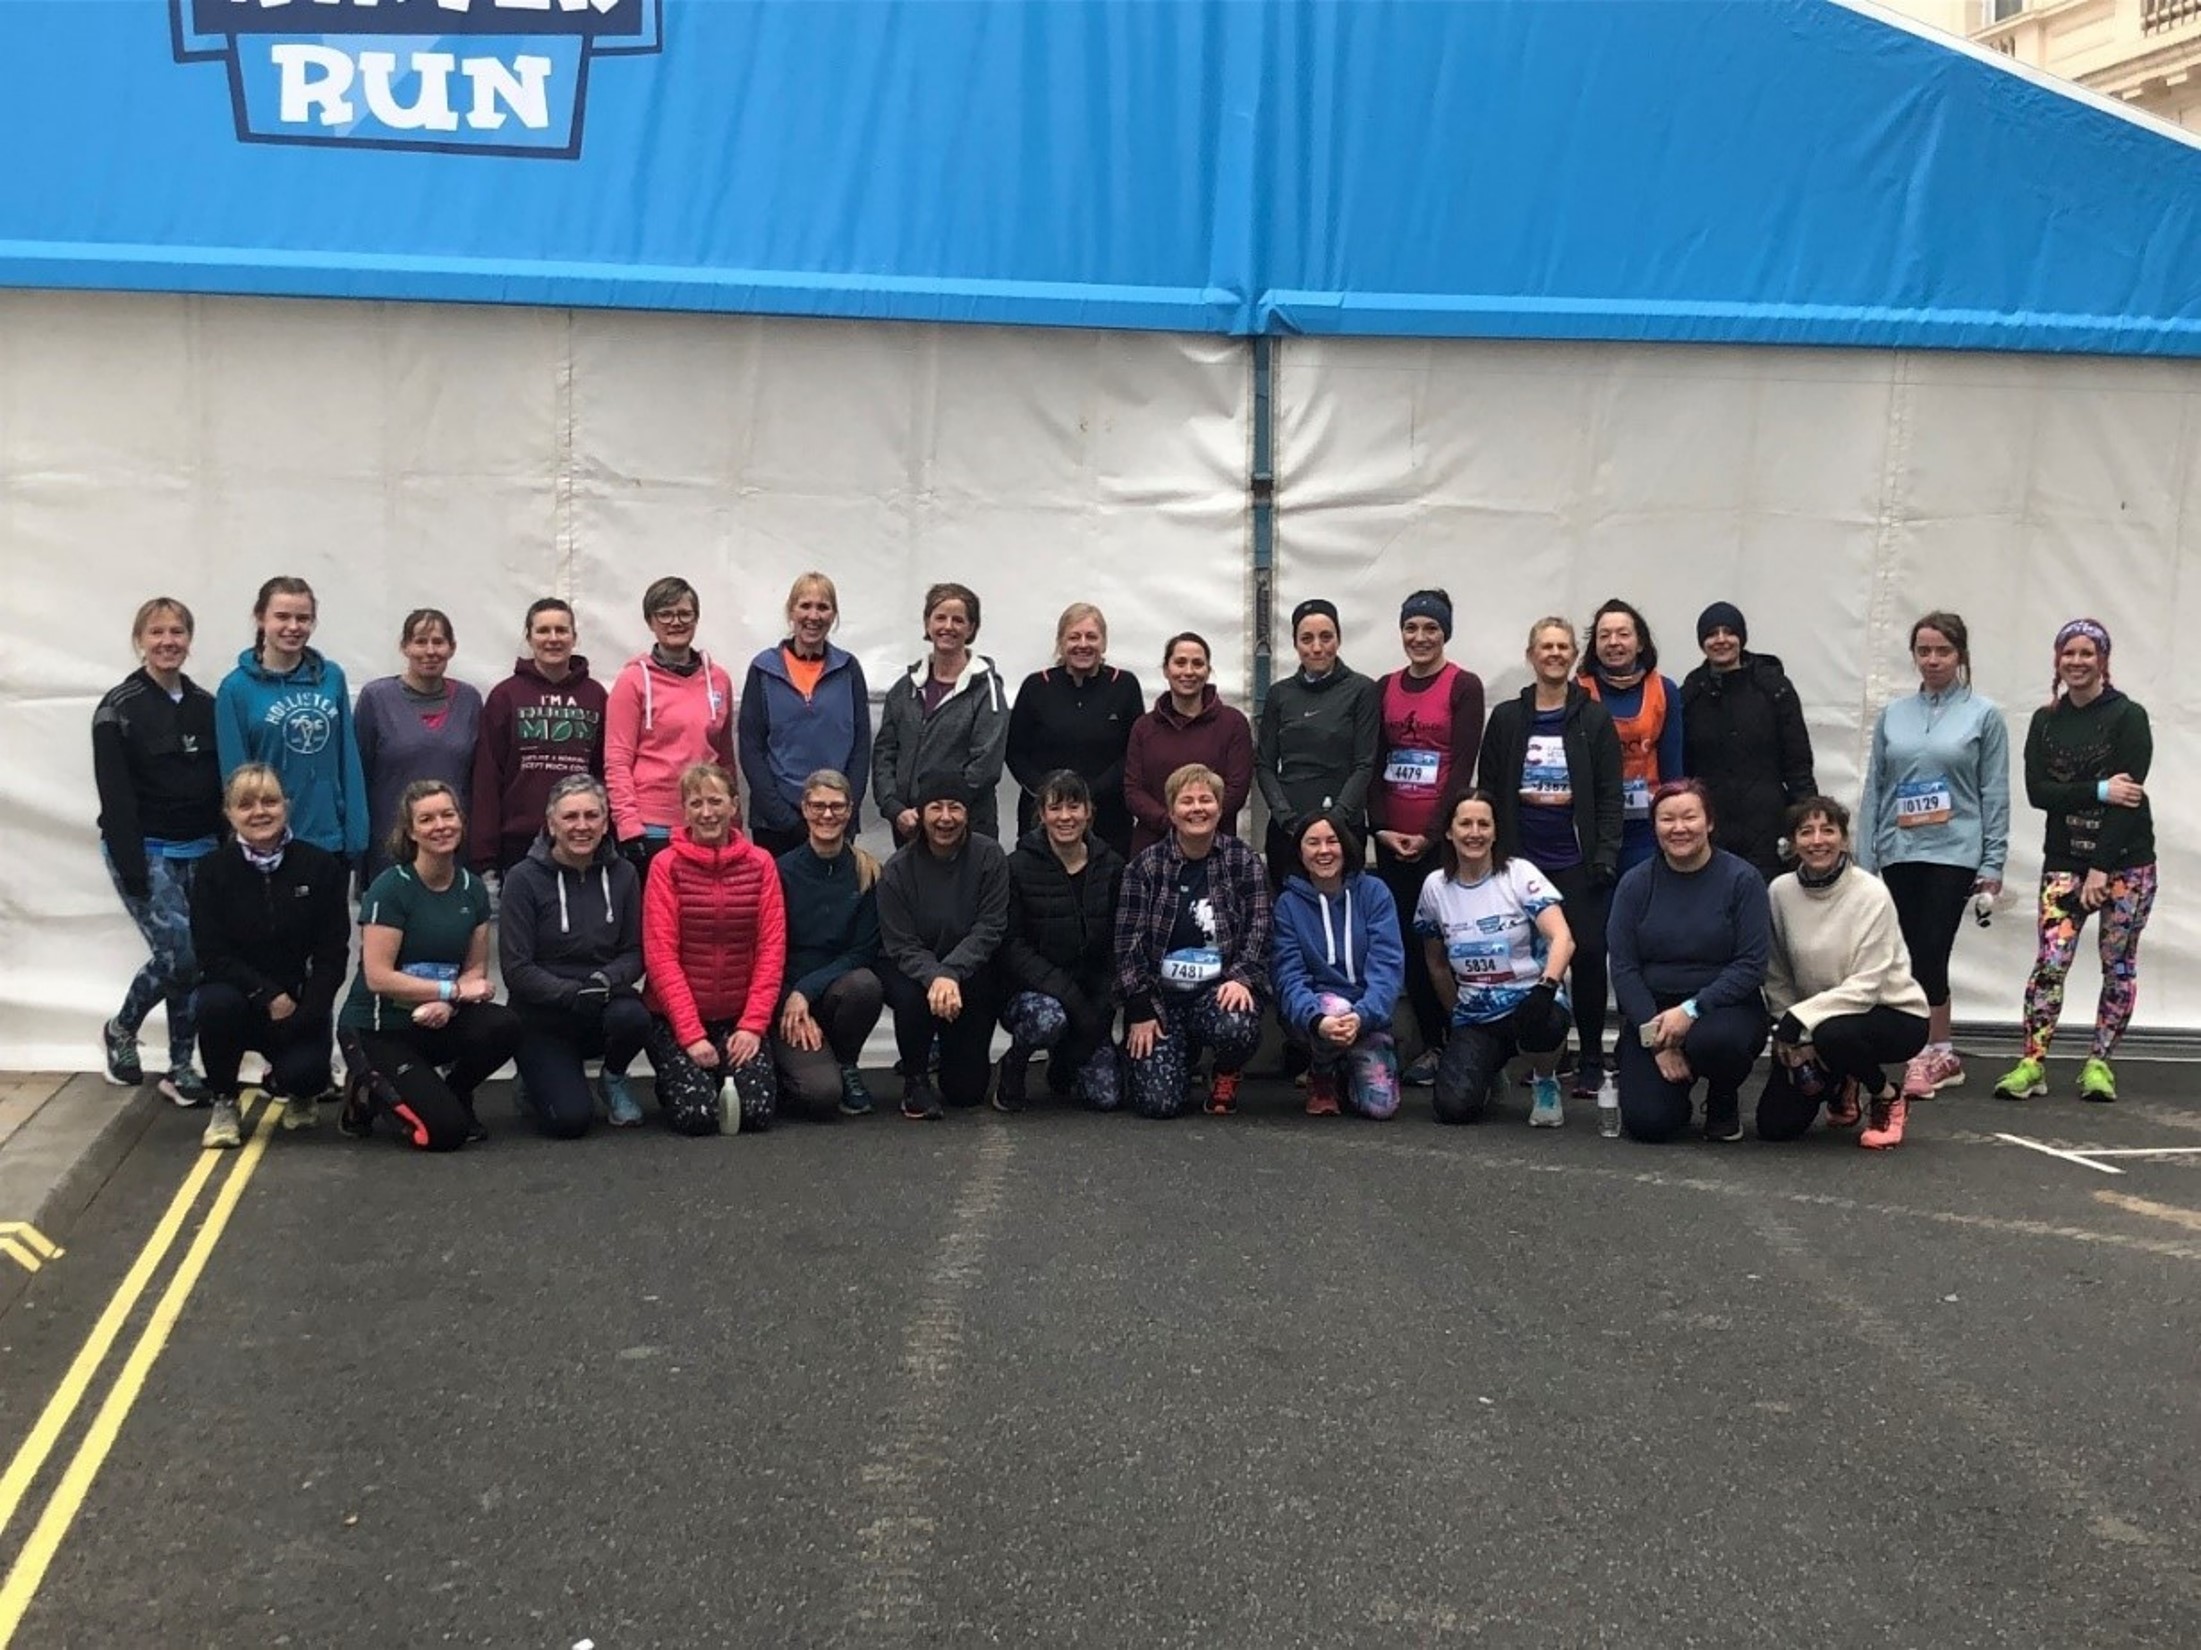 A group picture of runners all gathered in front of a tent